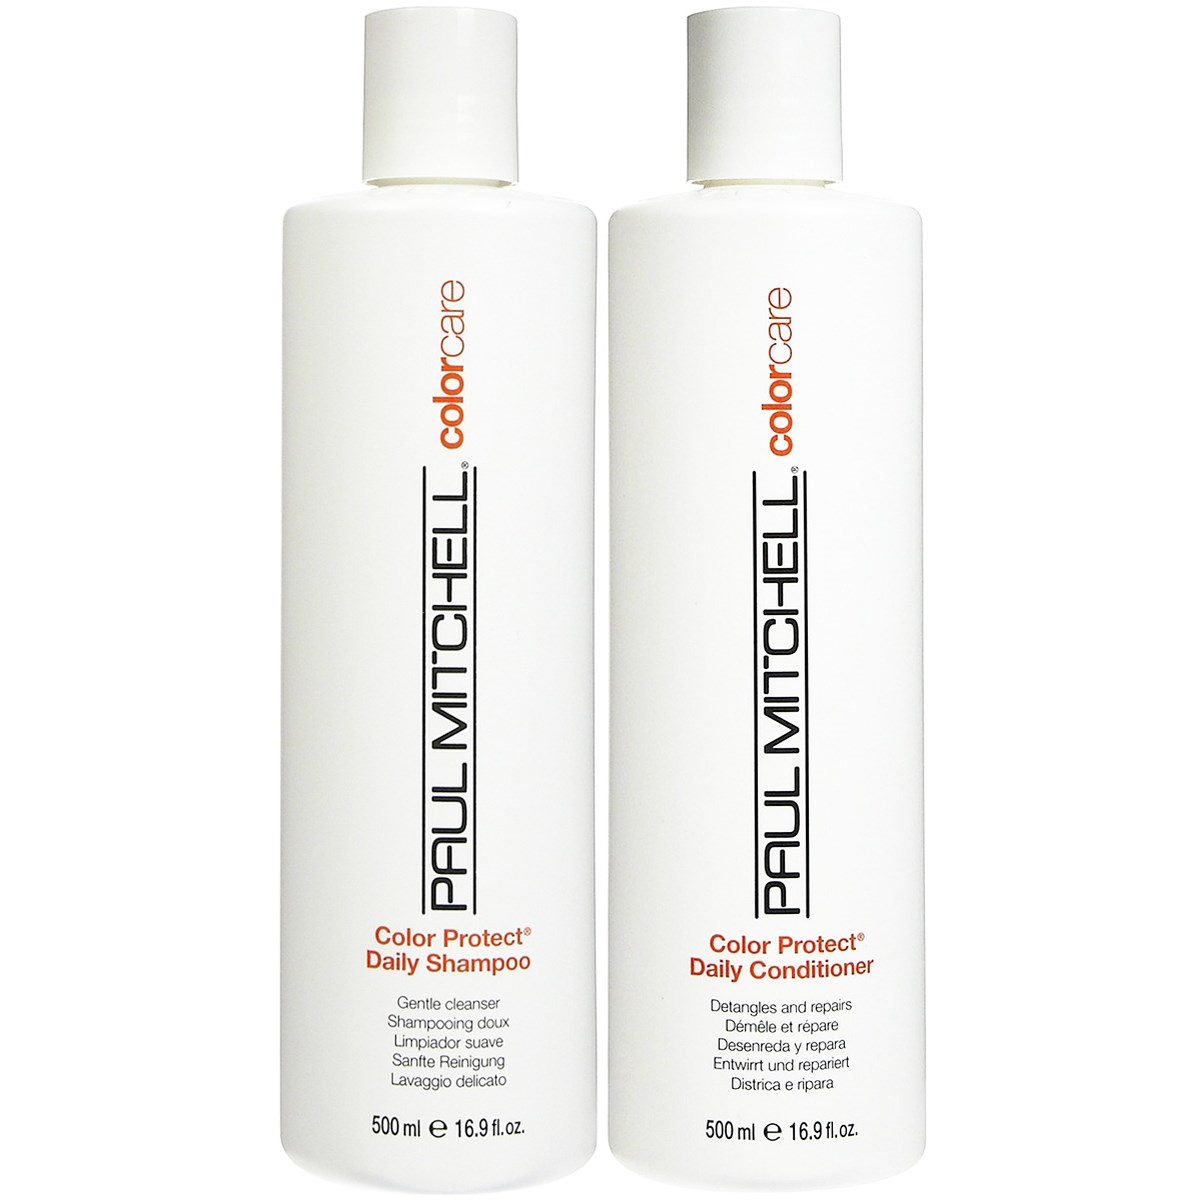 Paul Mitchell ColorCare Color Protect Daily Paket